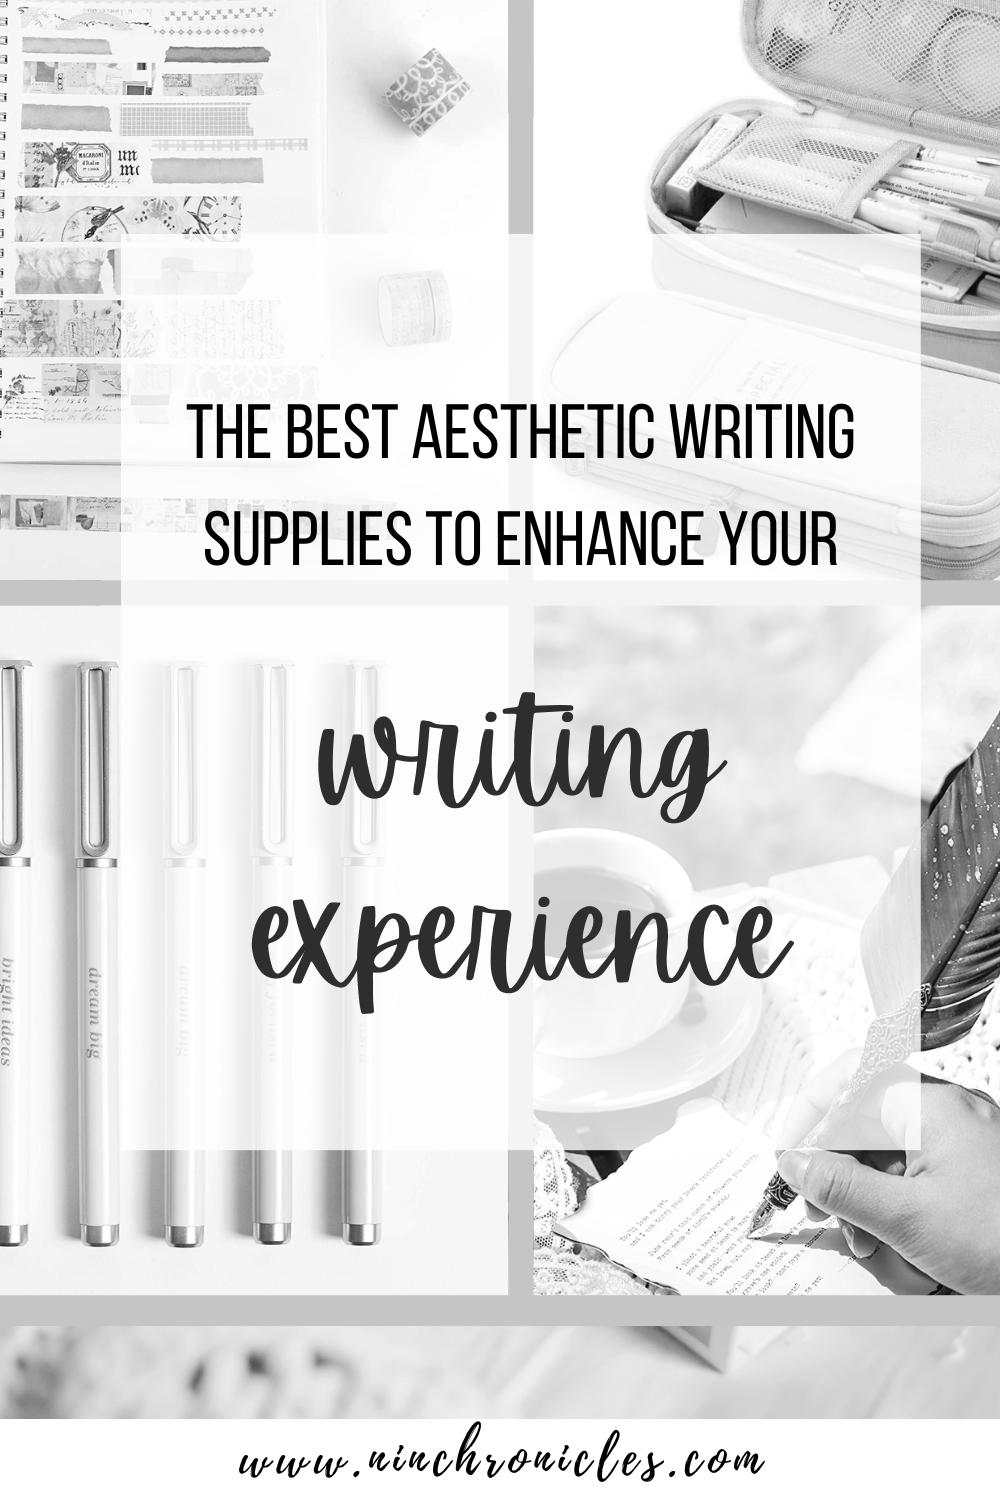 The Best Aesthetic Writing Supplies